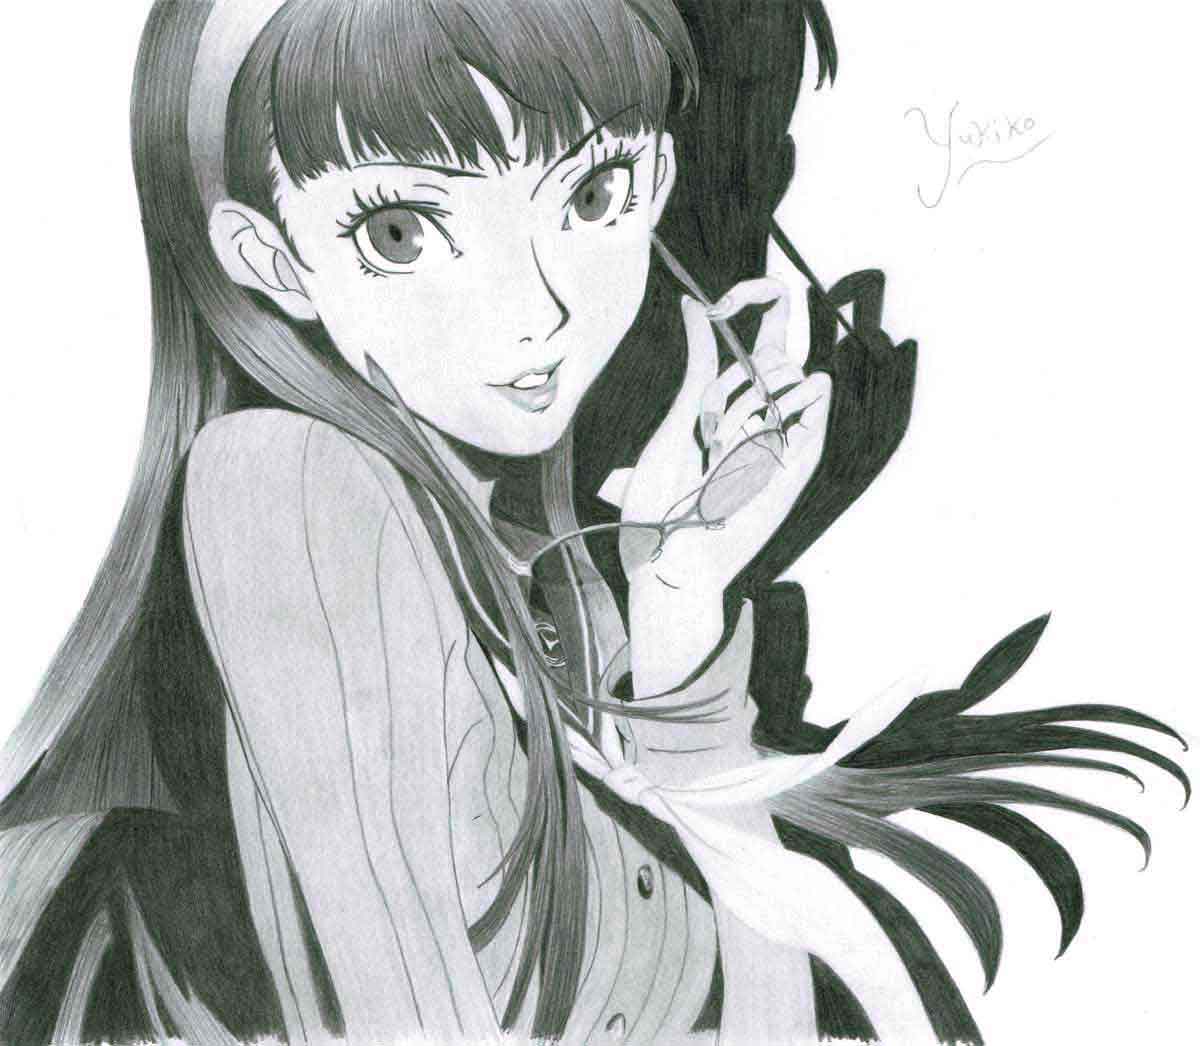 Realistic Pencil Drawing of Yukiko Amagi from the video game Persona 4 Golden, by Transgender Artist Sophie Lawson